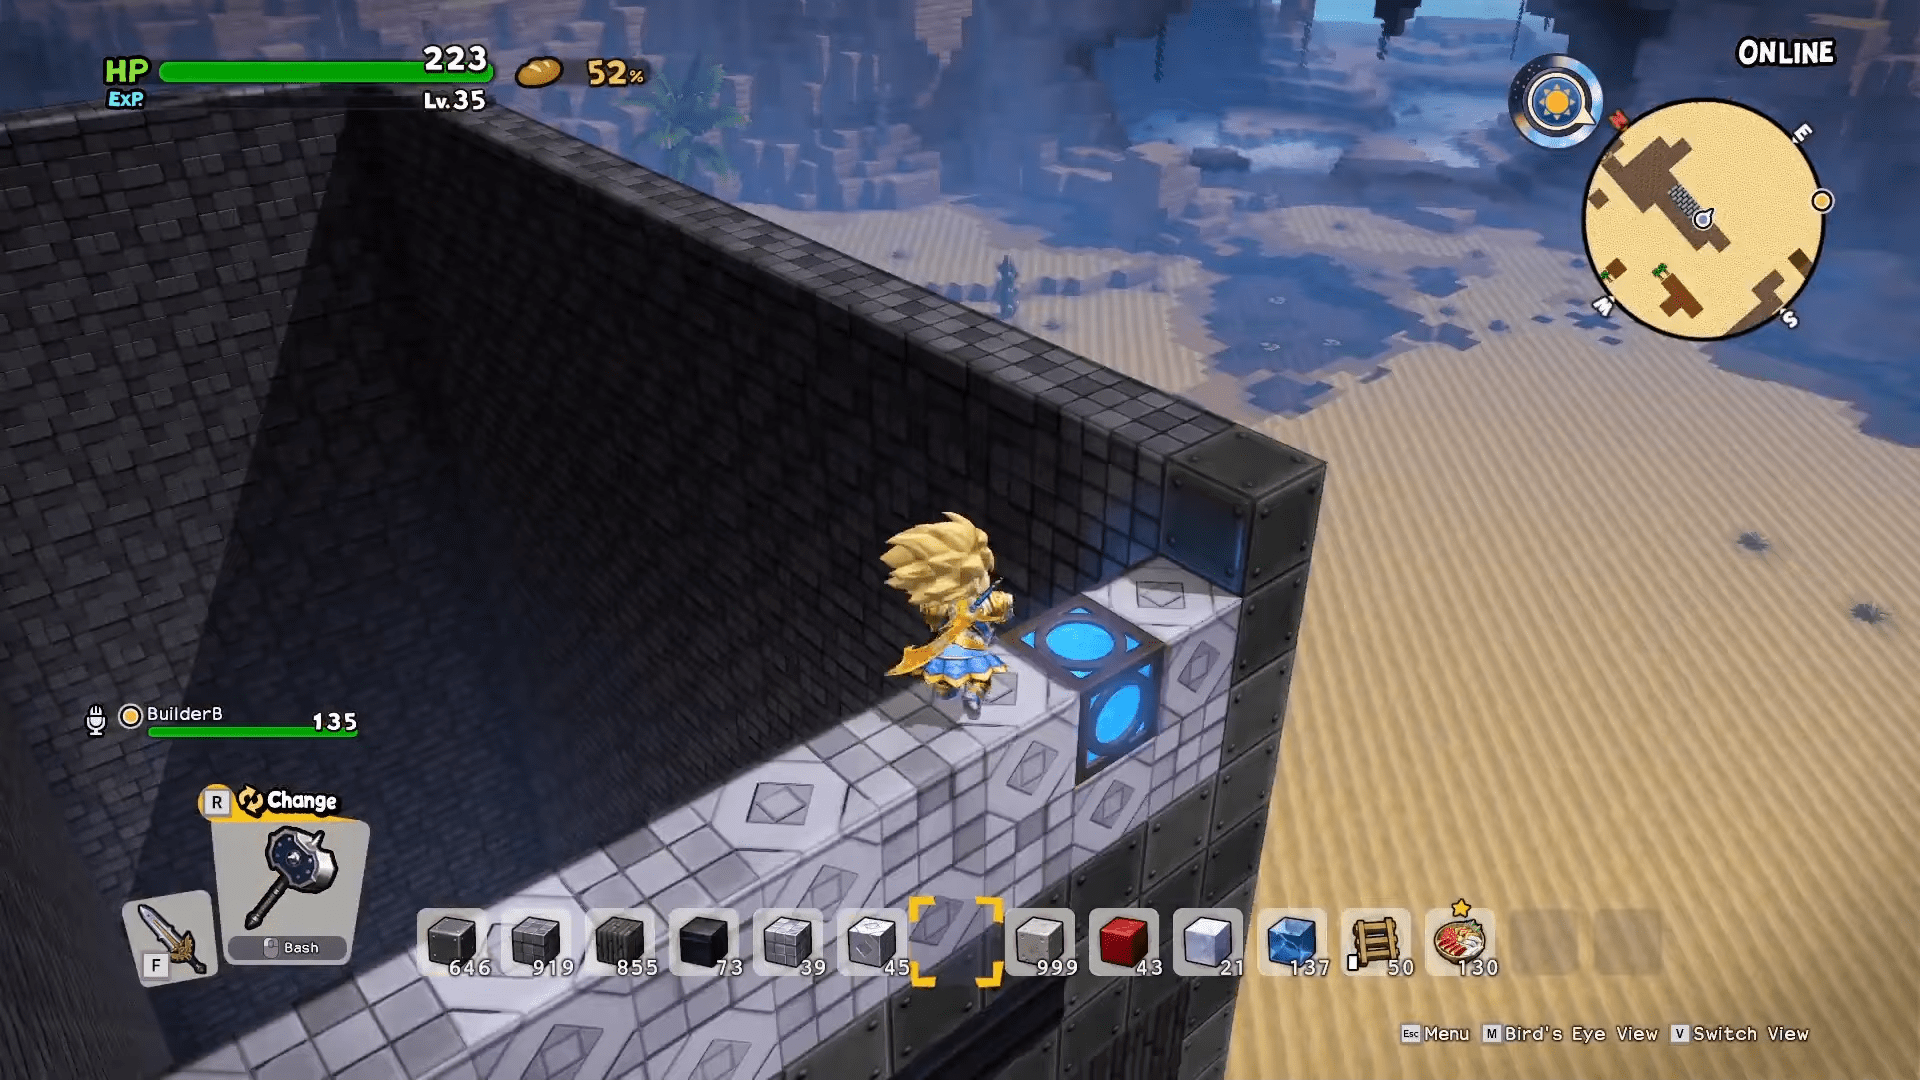 Dragon Quest Builders 2 Arrives On Steam With A Massive Free Demo For The Curious